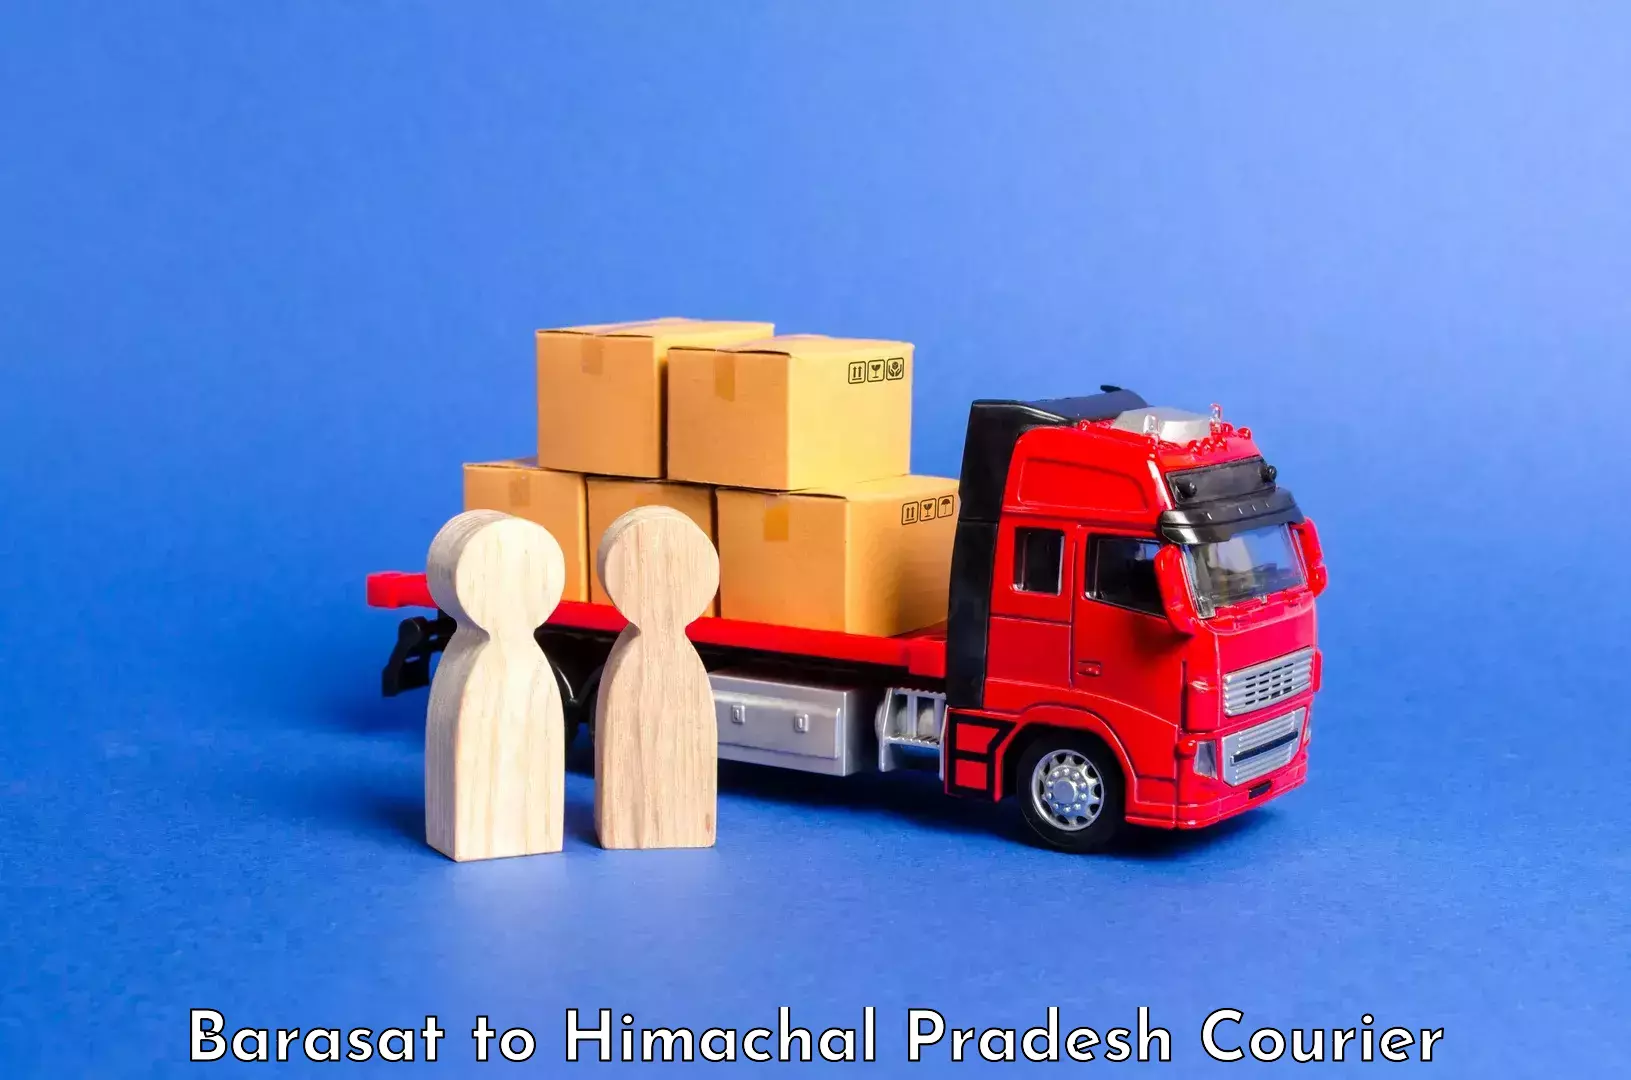 Luggage delivery network Barasat to Himachal Pradesh